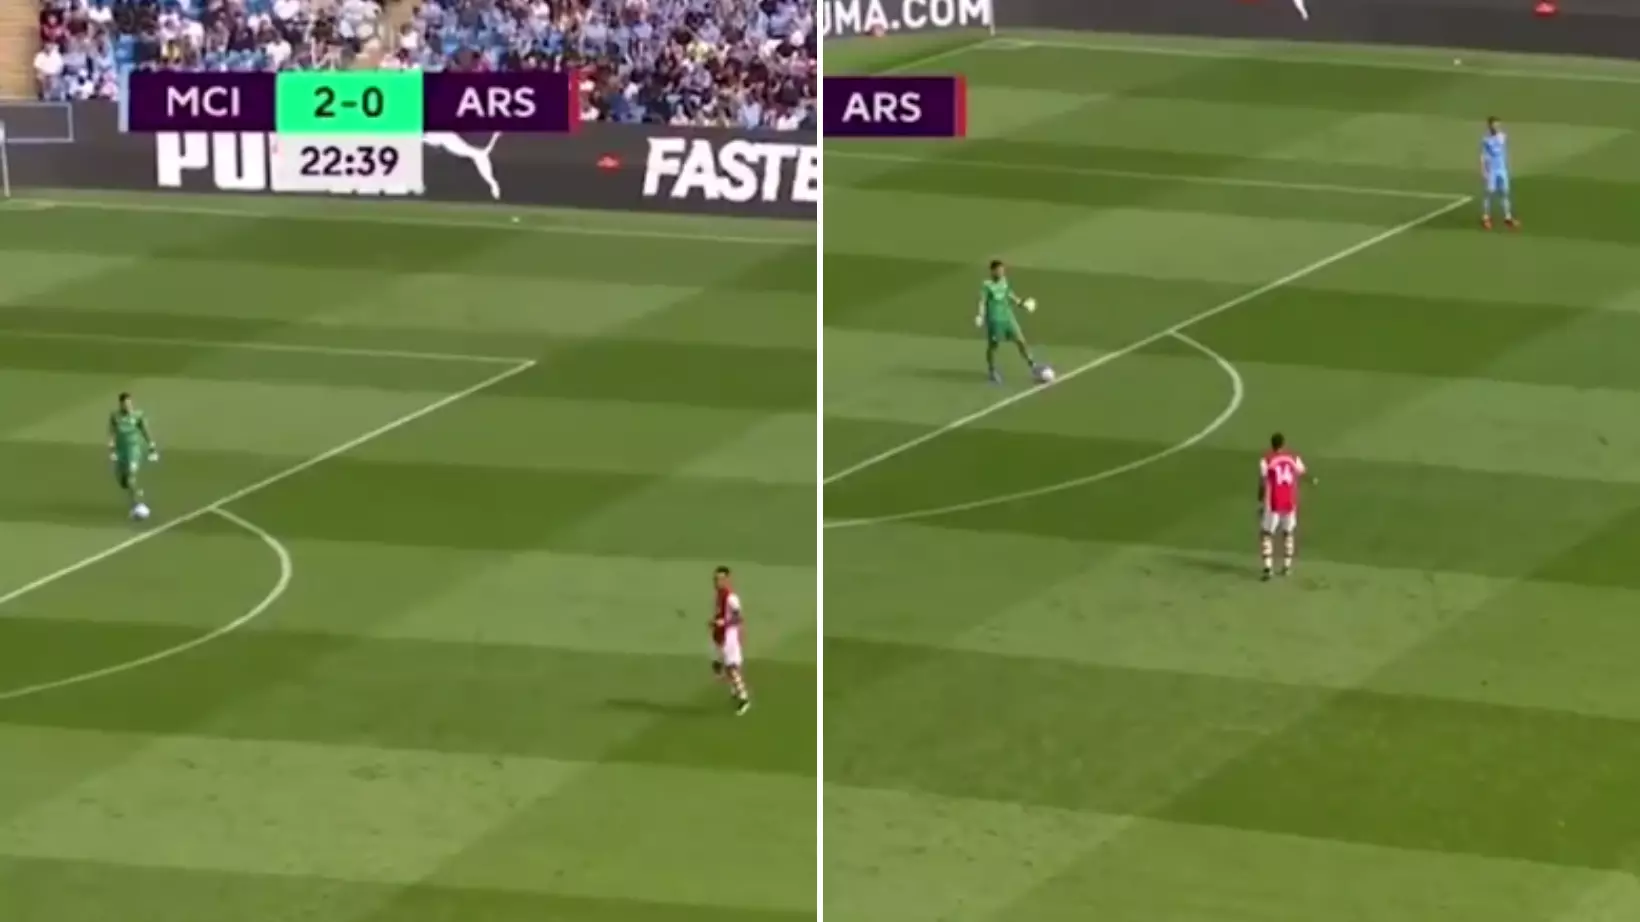 Damning Video Of Arsenal's 'Pressing' Against Man City Goes Viral